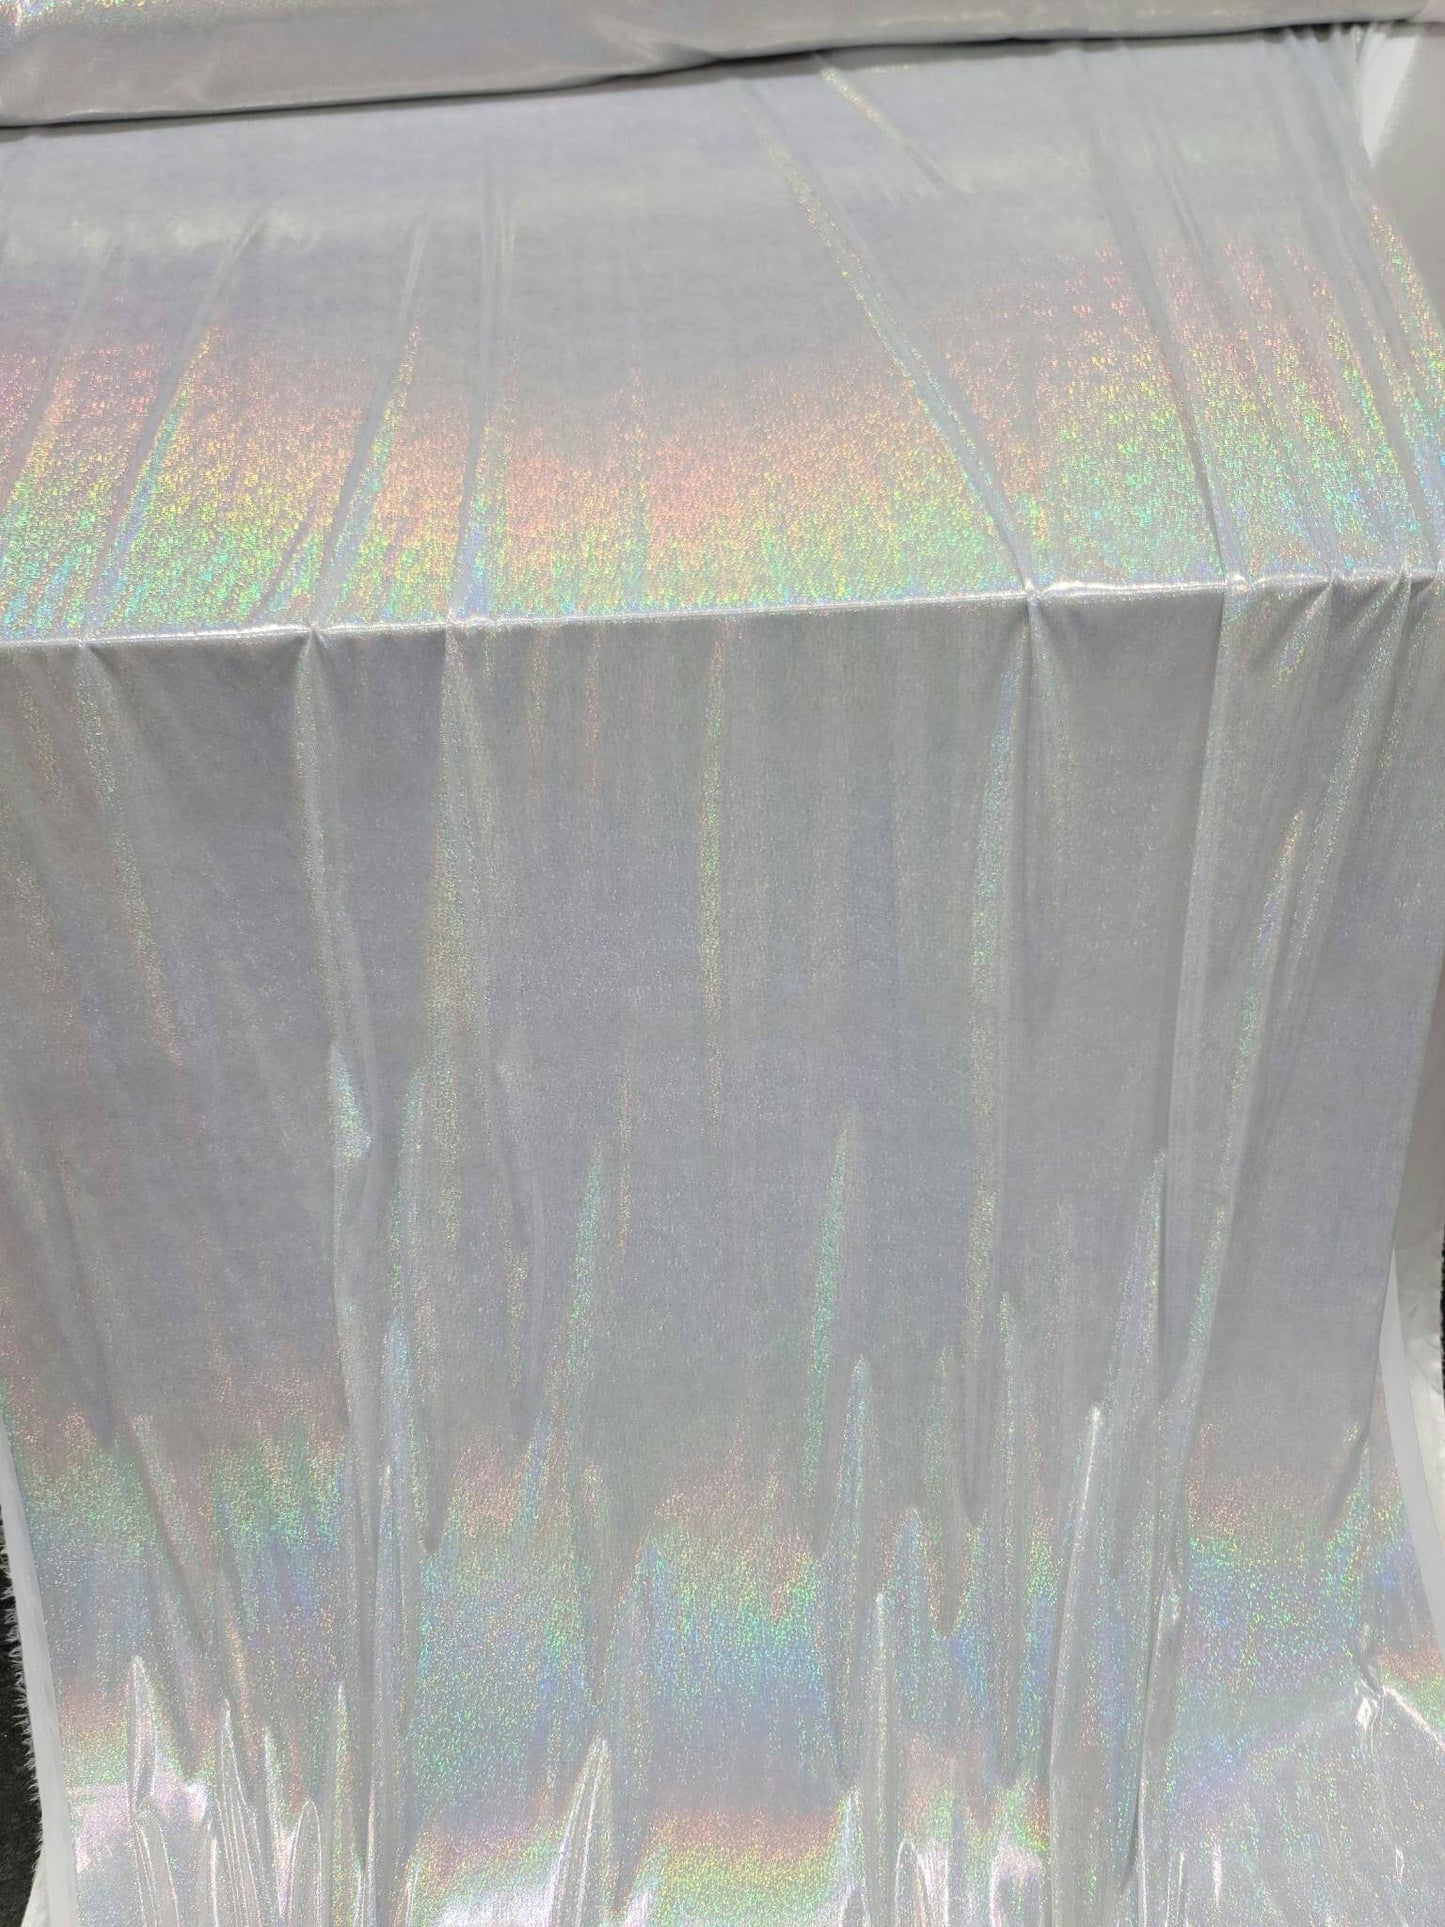 Iridescent Silver Sparkly Glitter Polyester Fabric Sold By The Yard Dress Clothing Hologram Shimmer Bridal Evening Dress Decoration Clothing